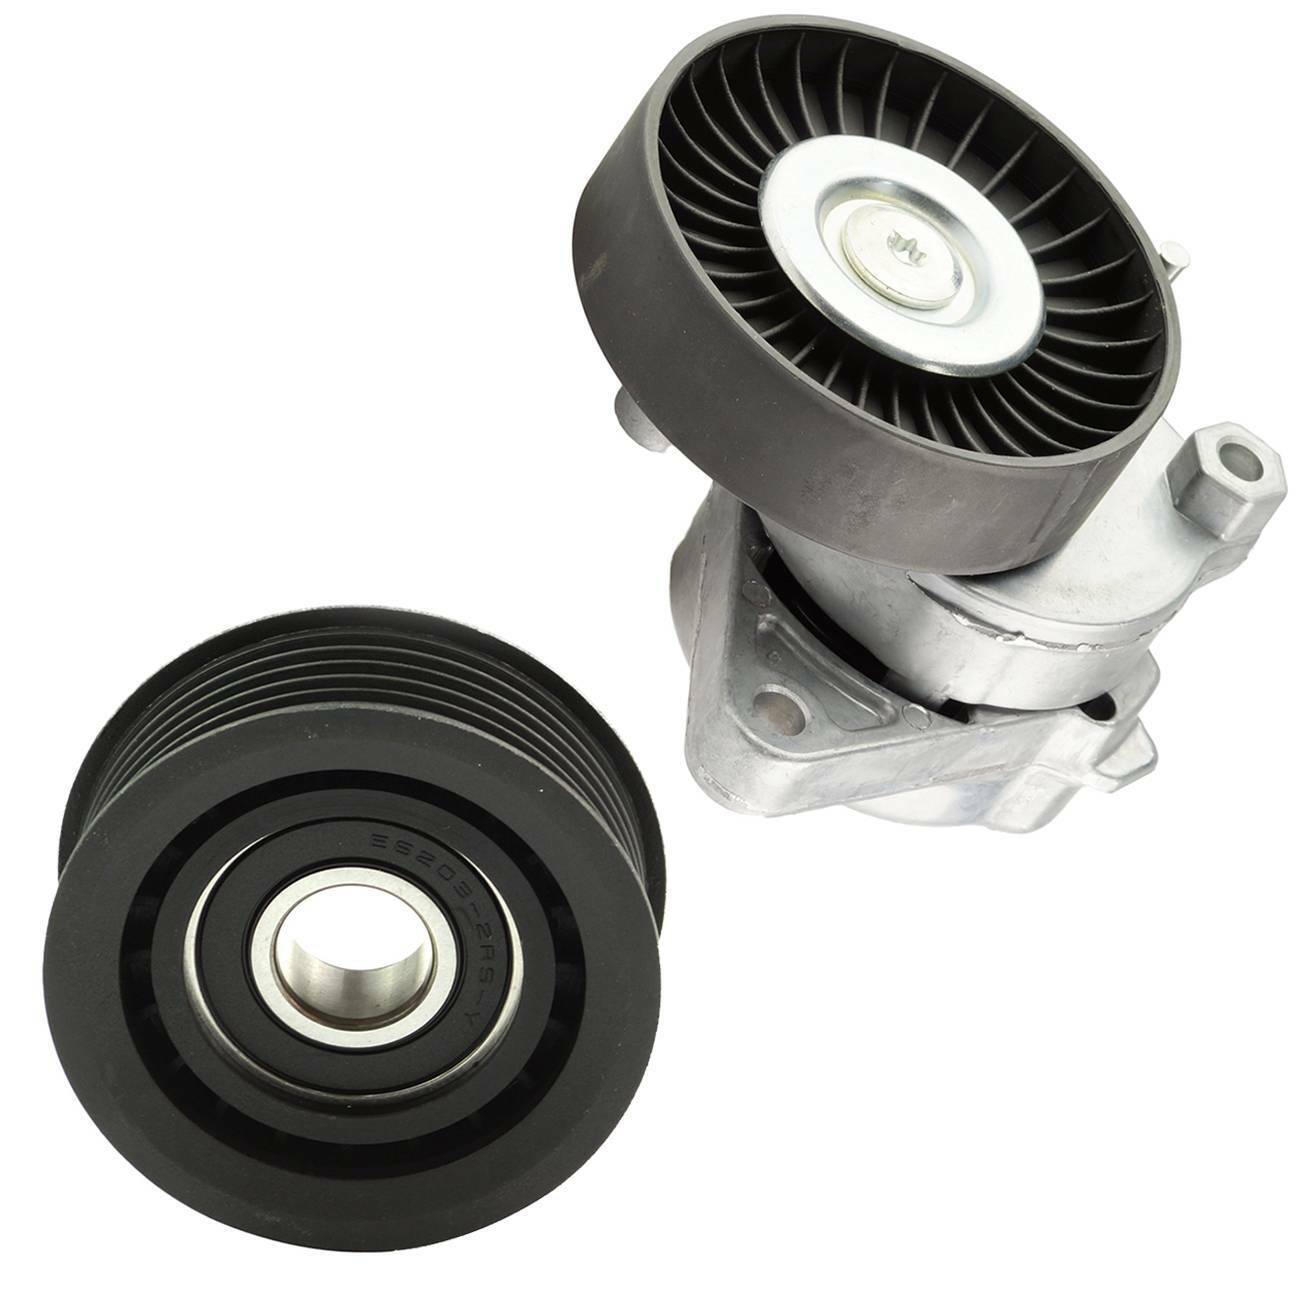 KIT Tensioner Pulley + Idler Pulley Fits Mercedes Benz S350 E320 C280 1122000970